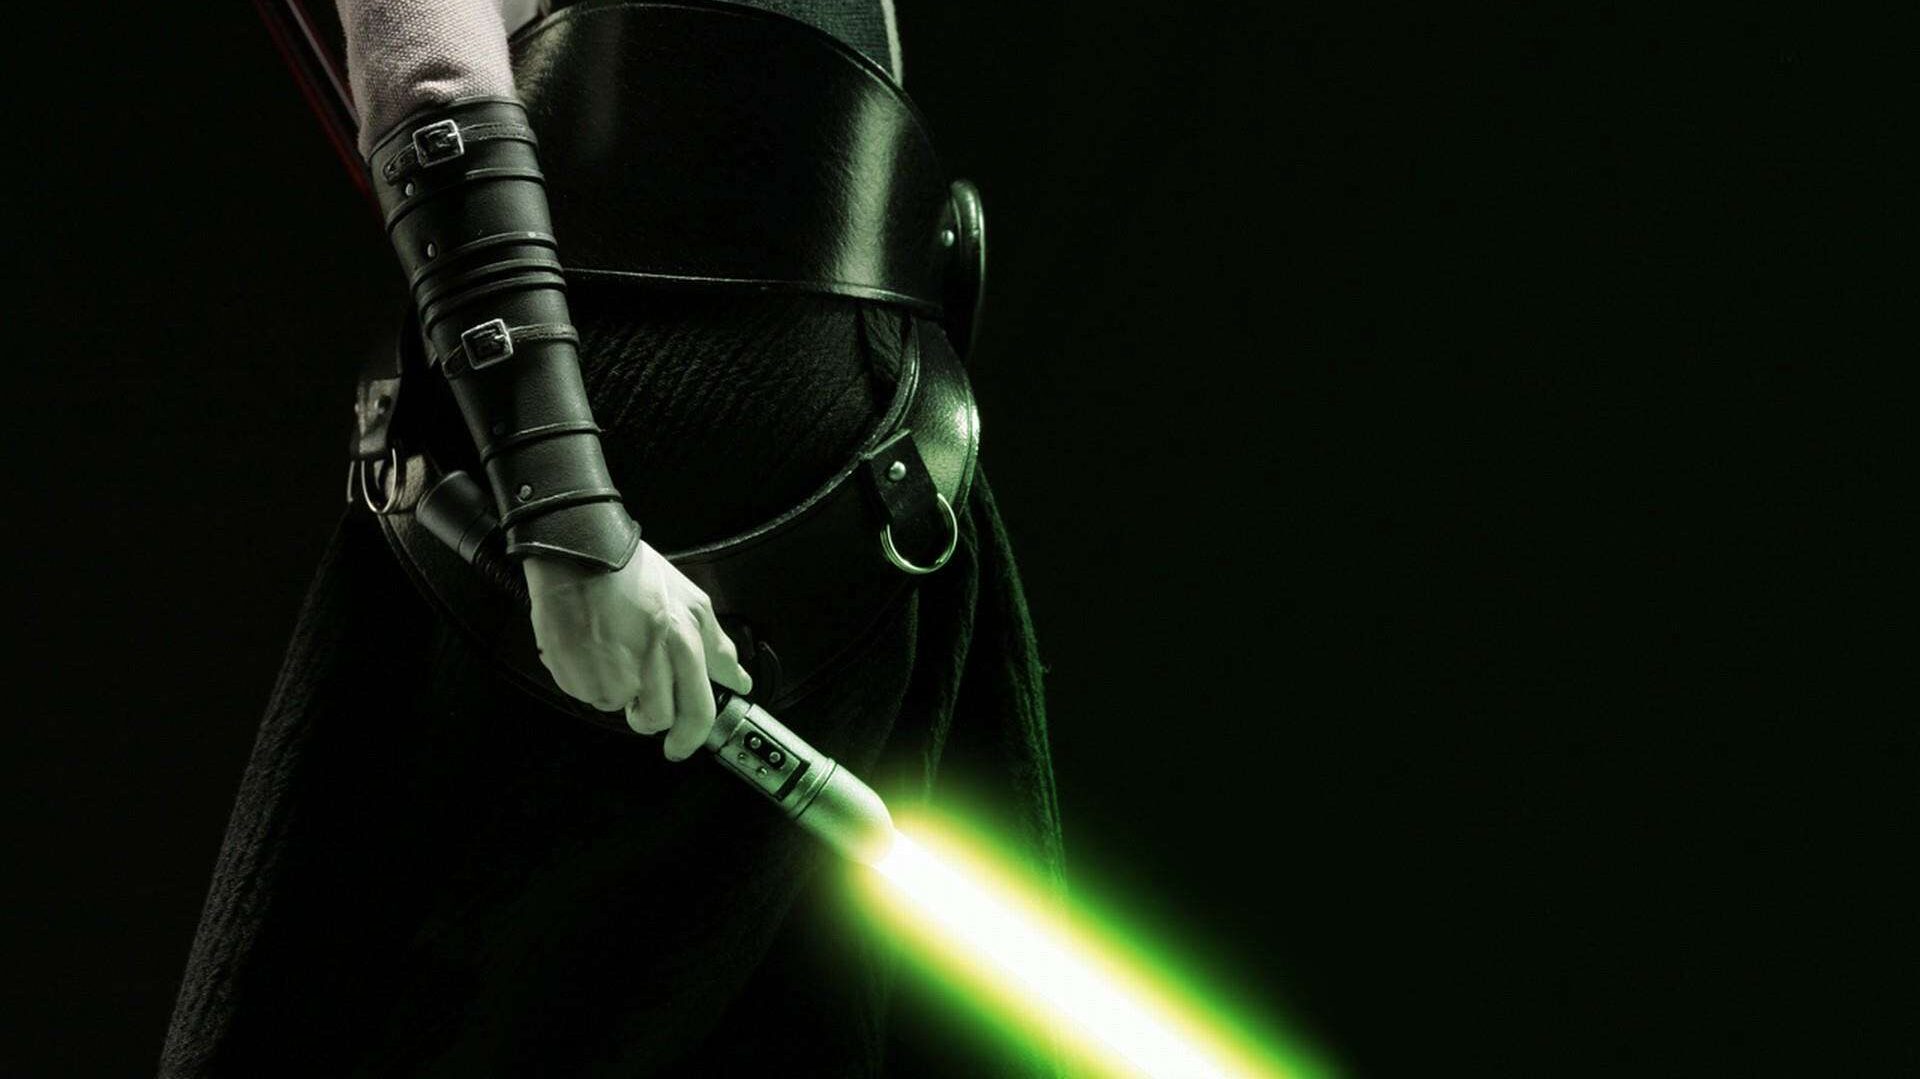 Way of the Saber Jedi Lightsaber Training Classes